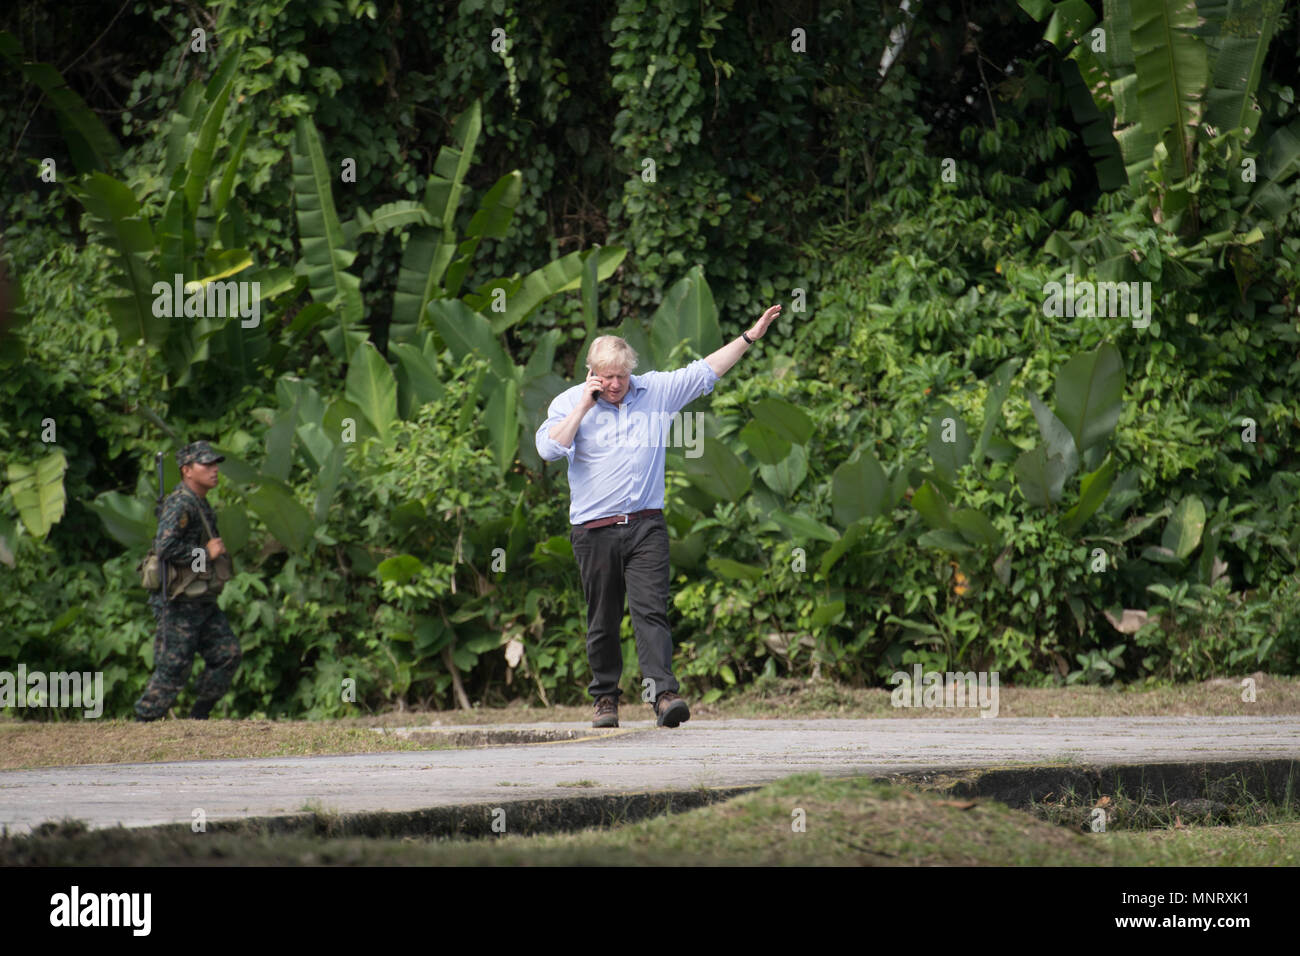 Foreign Secretary Boris Johnson makes a phone call during his visit to the Nanay Naval Base on the Amazon river near Iquitos in Peru to meet members of the Peruvian armed forces who are trying to prevent the illegal wildlife trade. Stock Photo